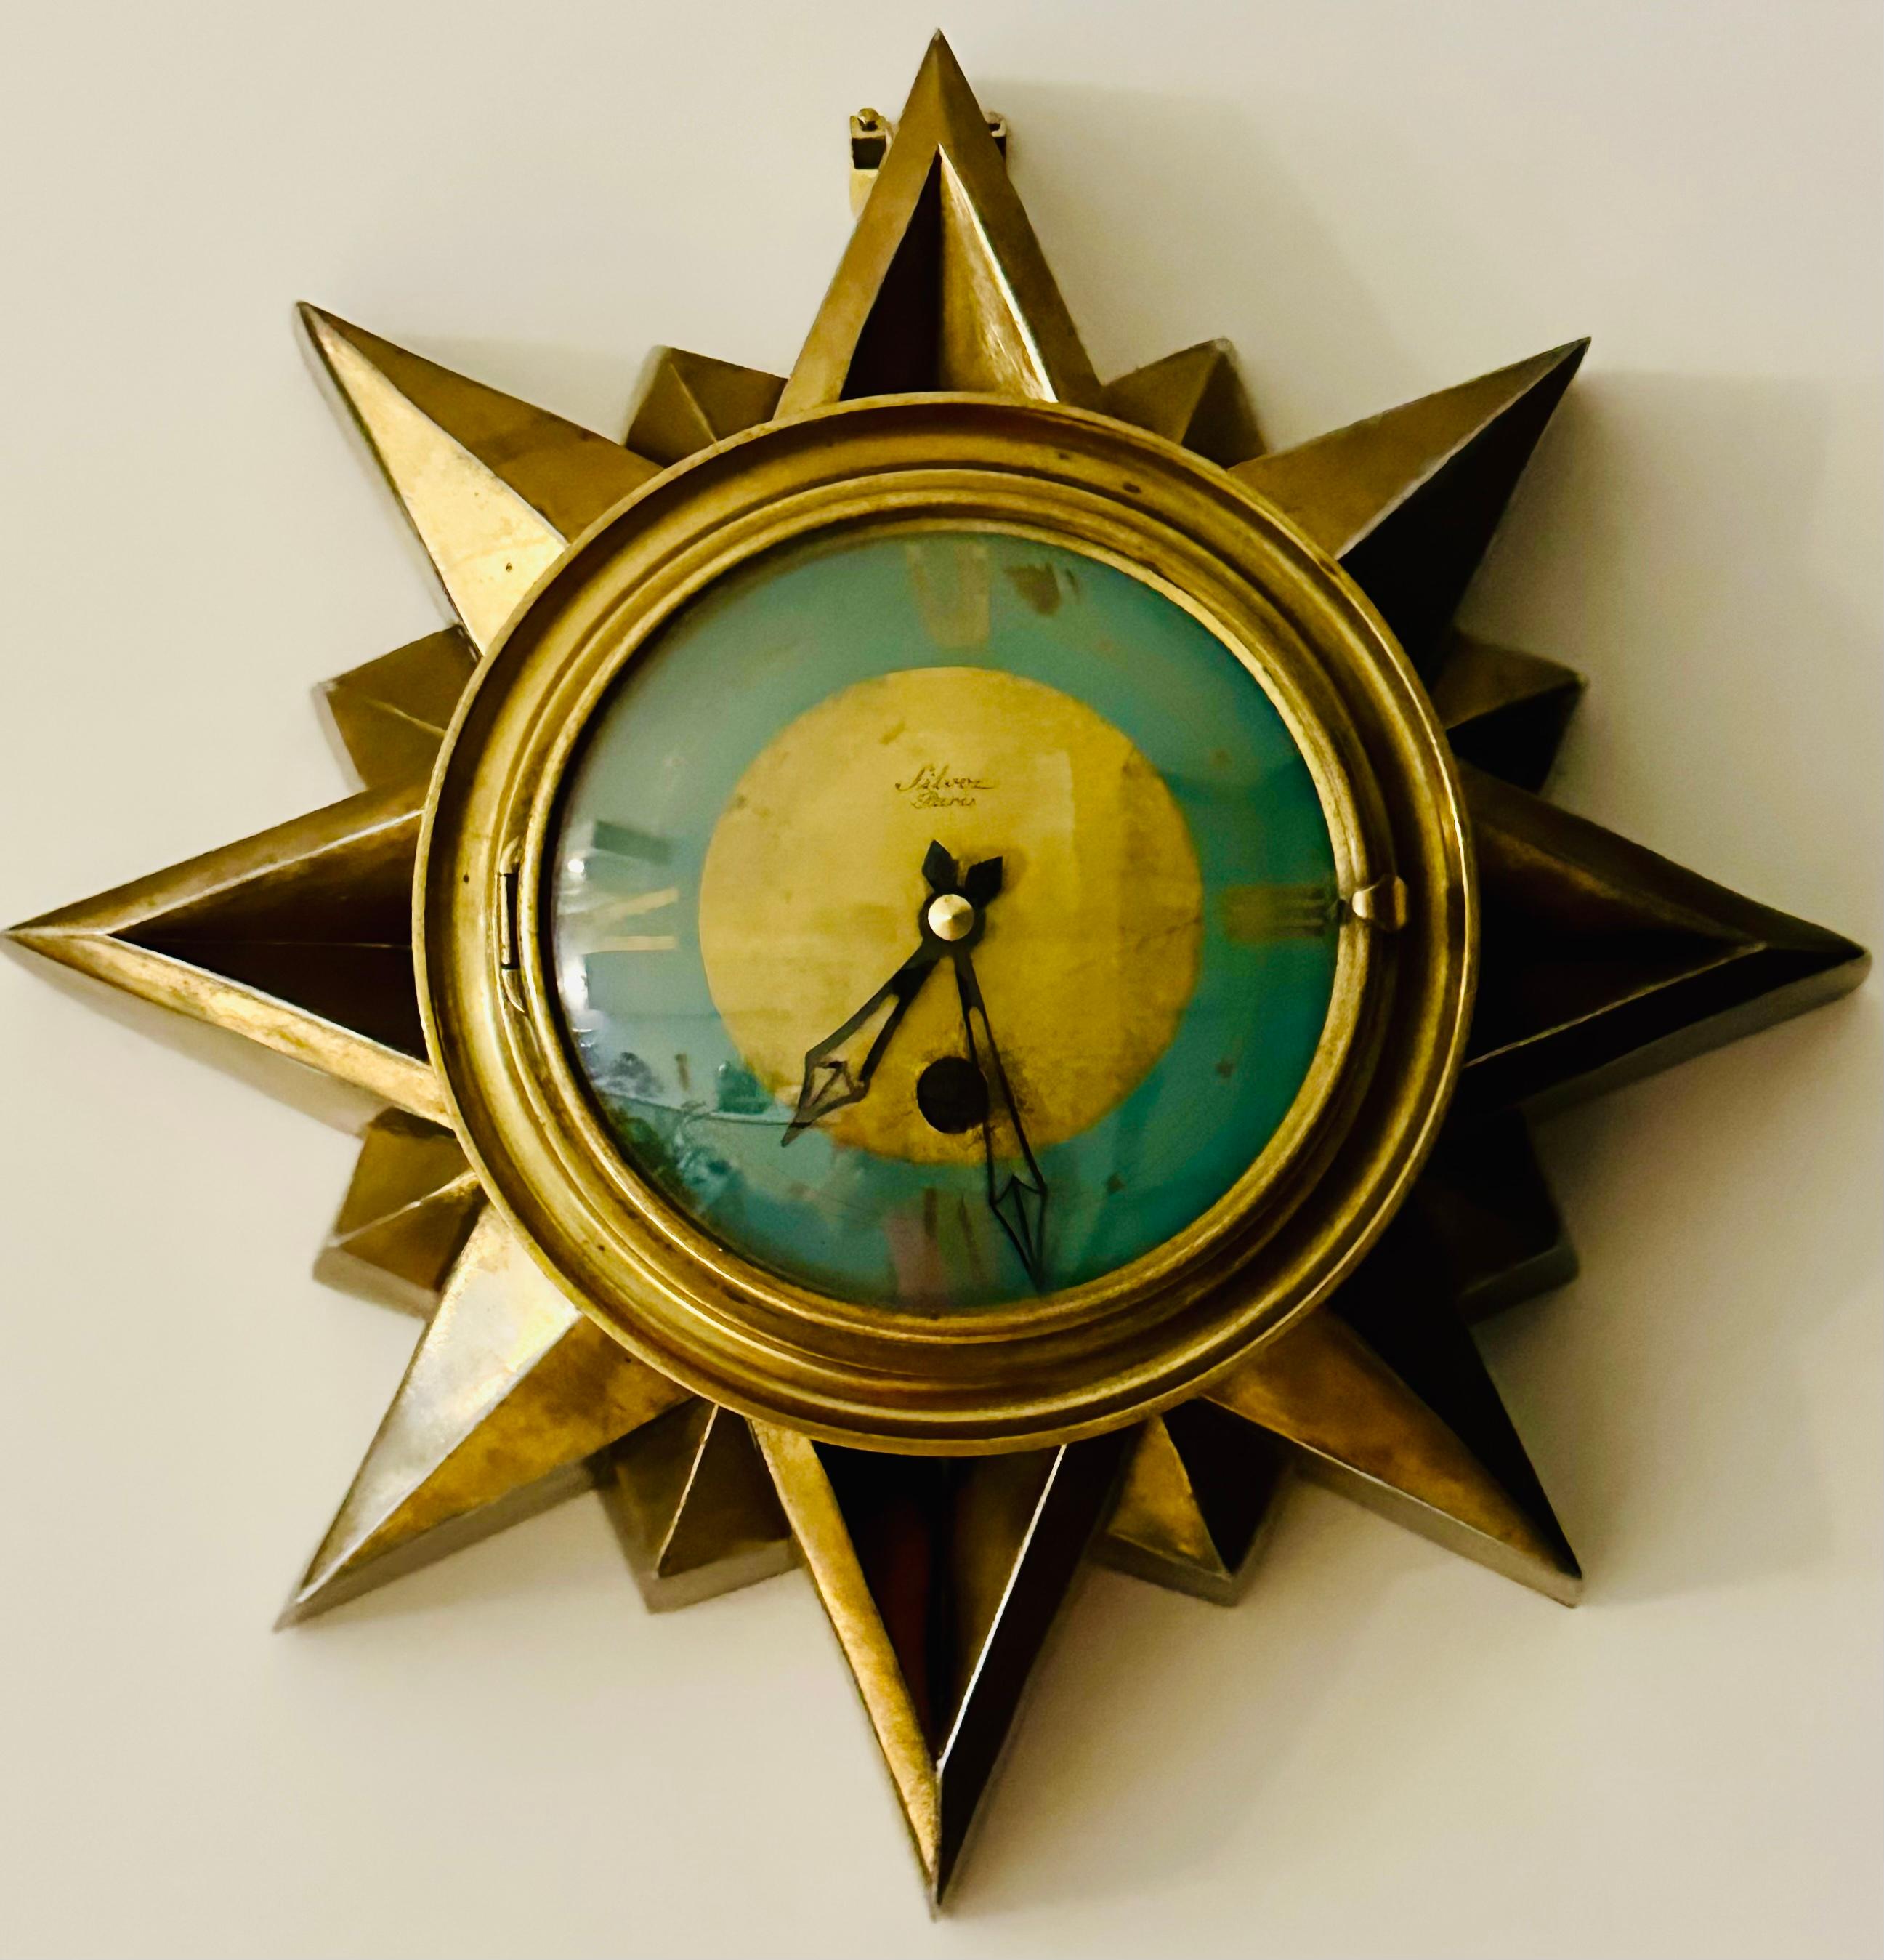 1930s Art Deco French Parisian brass sunburst wall clock manufactured by Cartel Silvoz Paris. The clock is made of brass-plated steel formed into an interesting sunburst design with a series of angled-triangular sun rays of varying sizes which burst